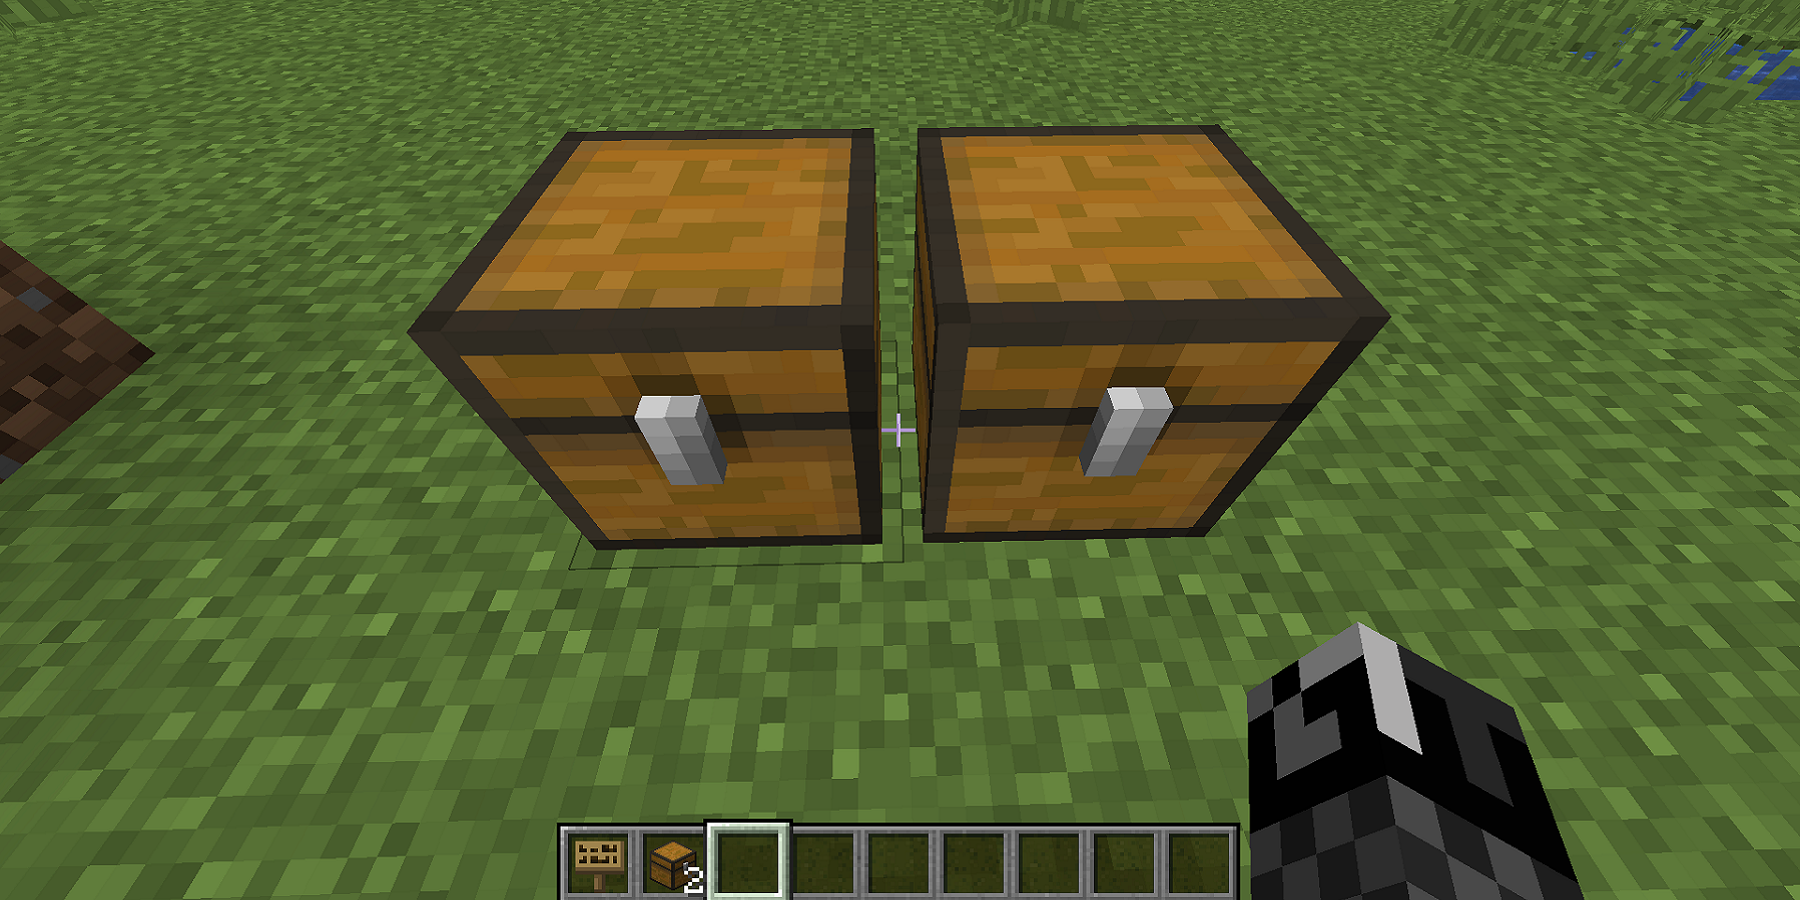 A screenshot from Minecraft showing two small chests next to each other, somehow.